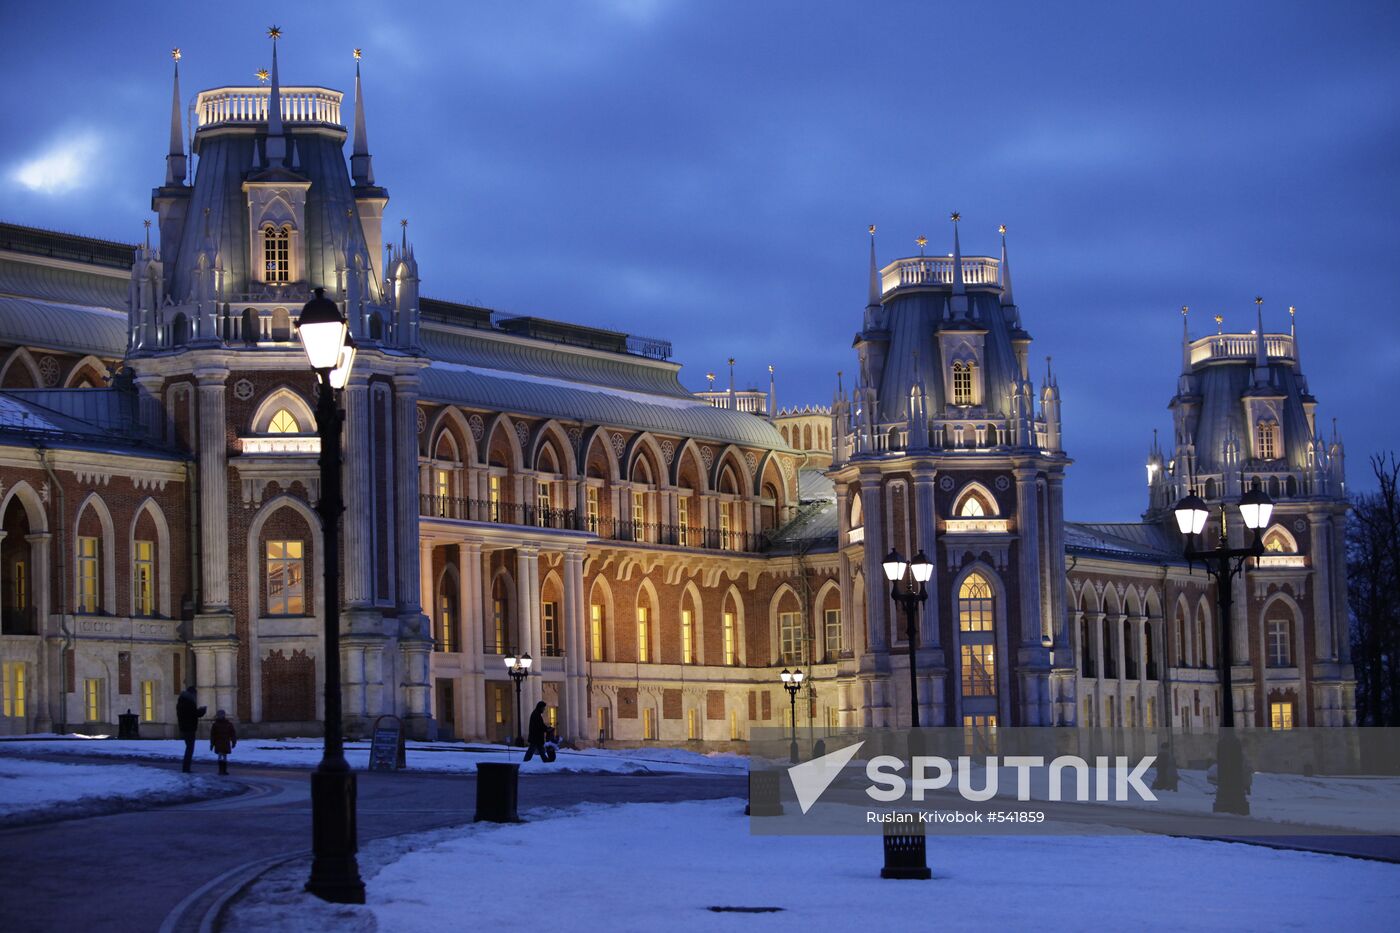 Tsaritsyno State Museum-Reserve